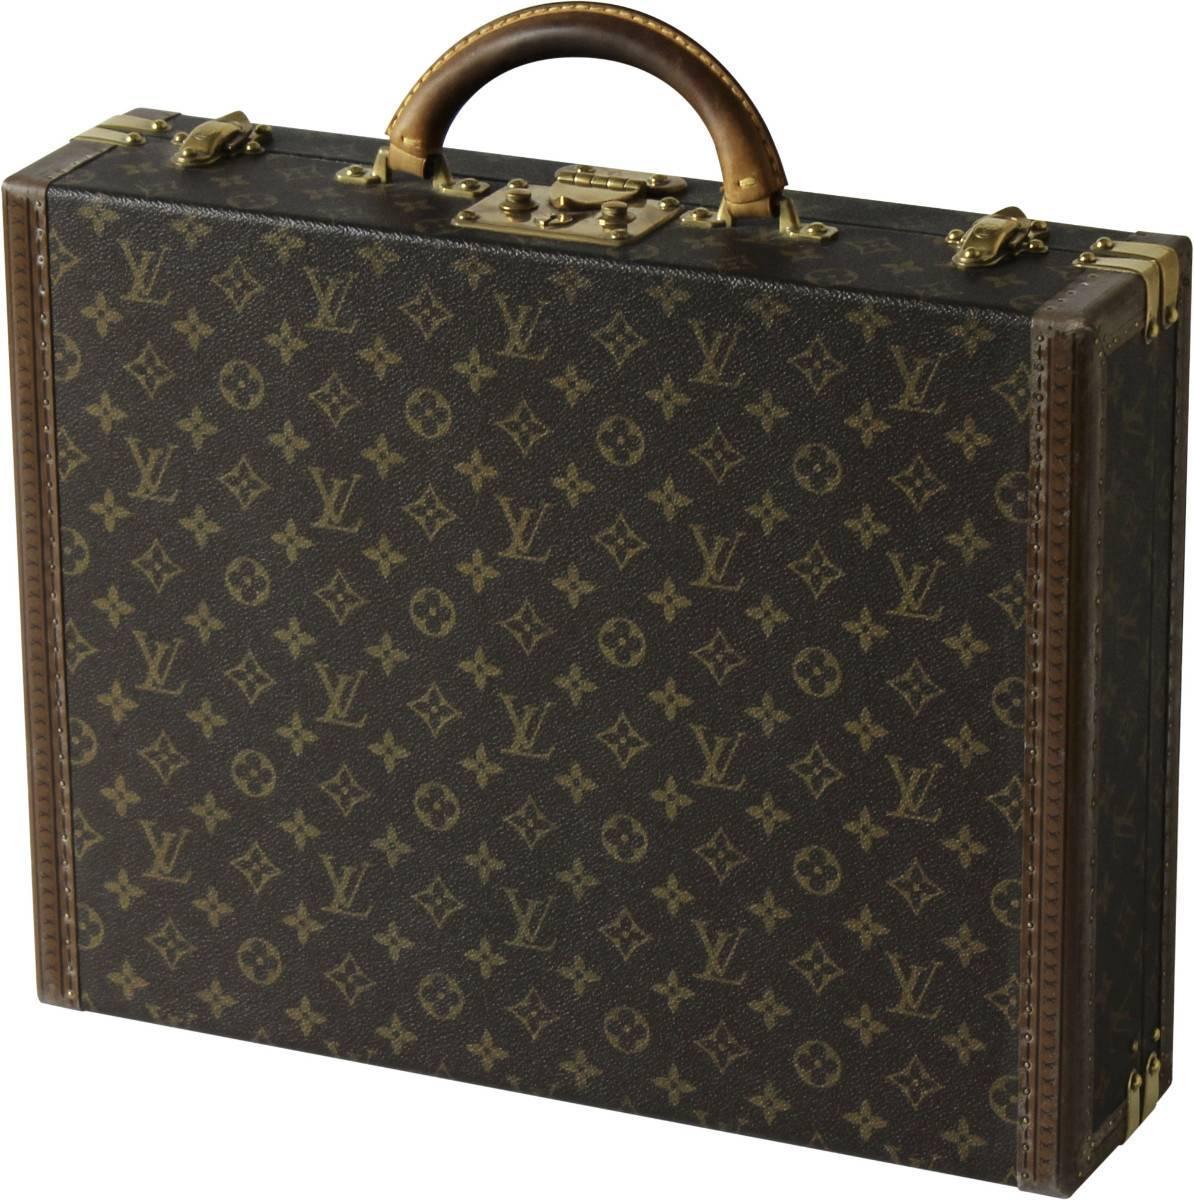 LOUIS VUITTON ATTACHE CASE WITH LV MONOGRAME AND COMBINATION LOCKS - Prop  hire for film, TV, and events